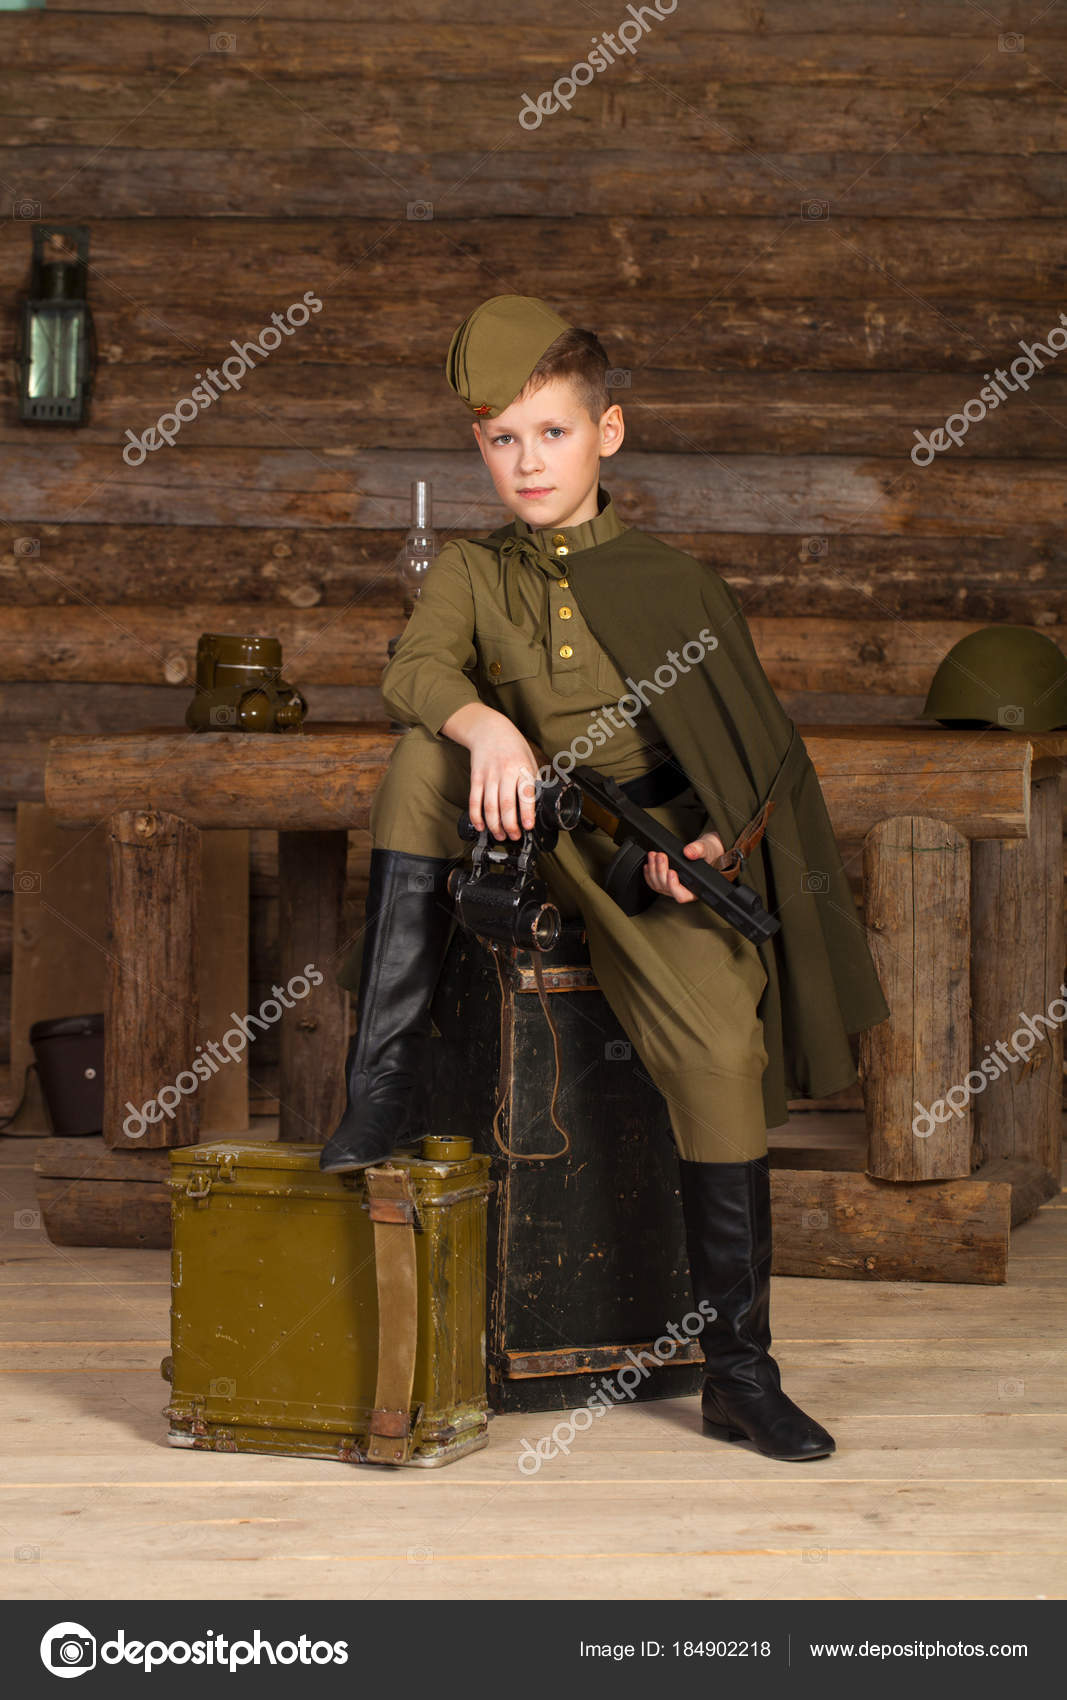 Old Russian Military Uniform